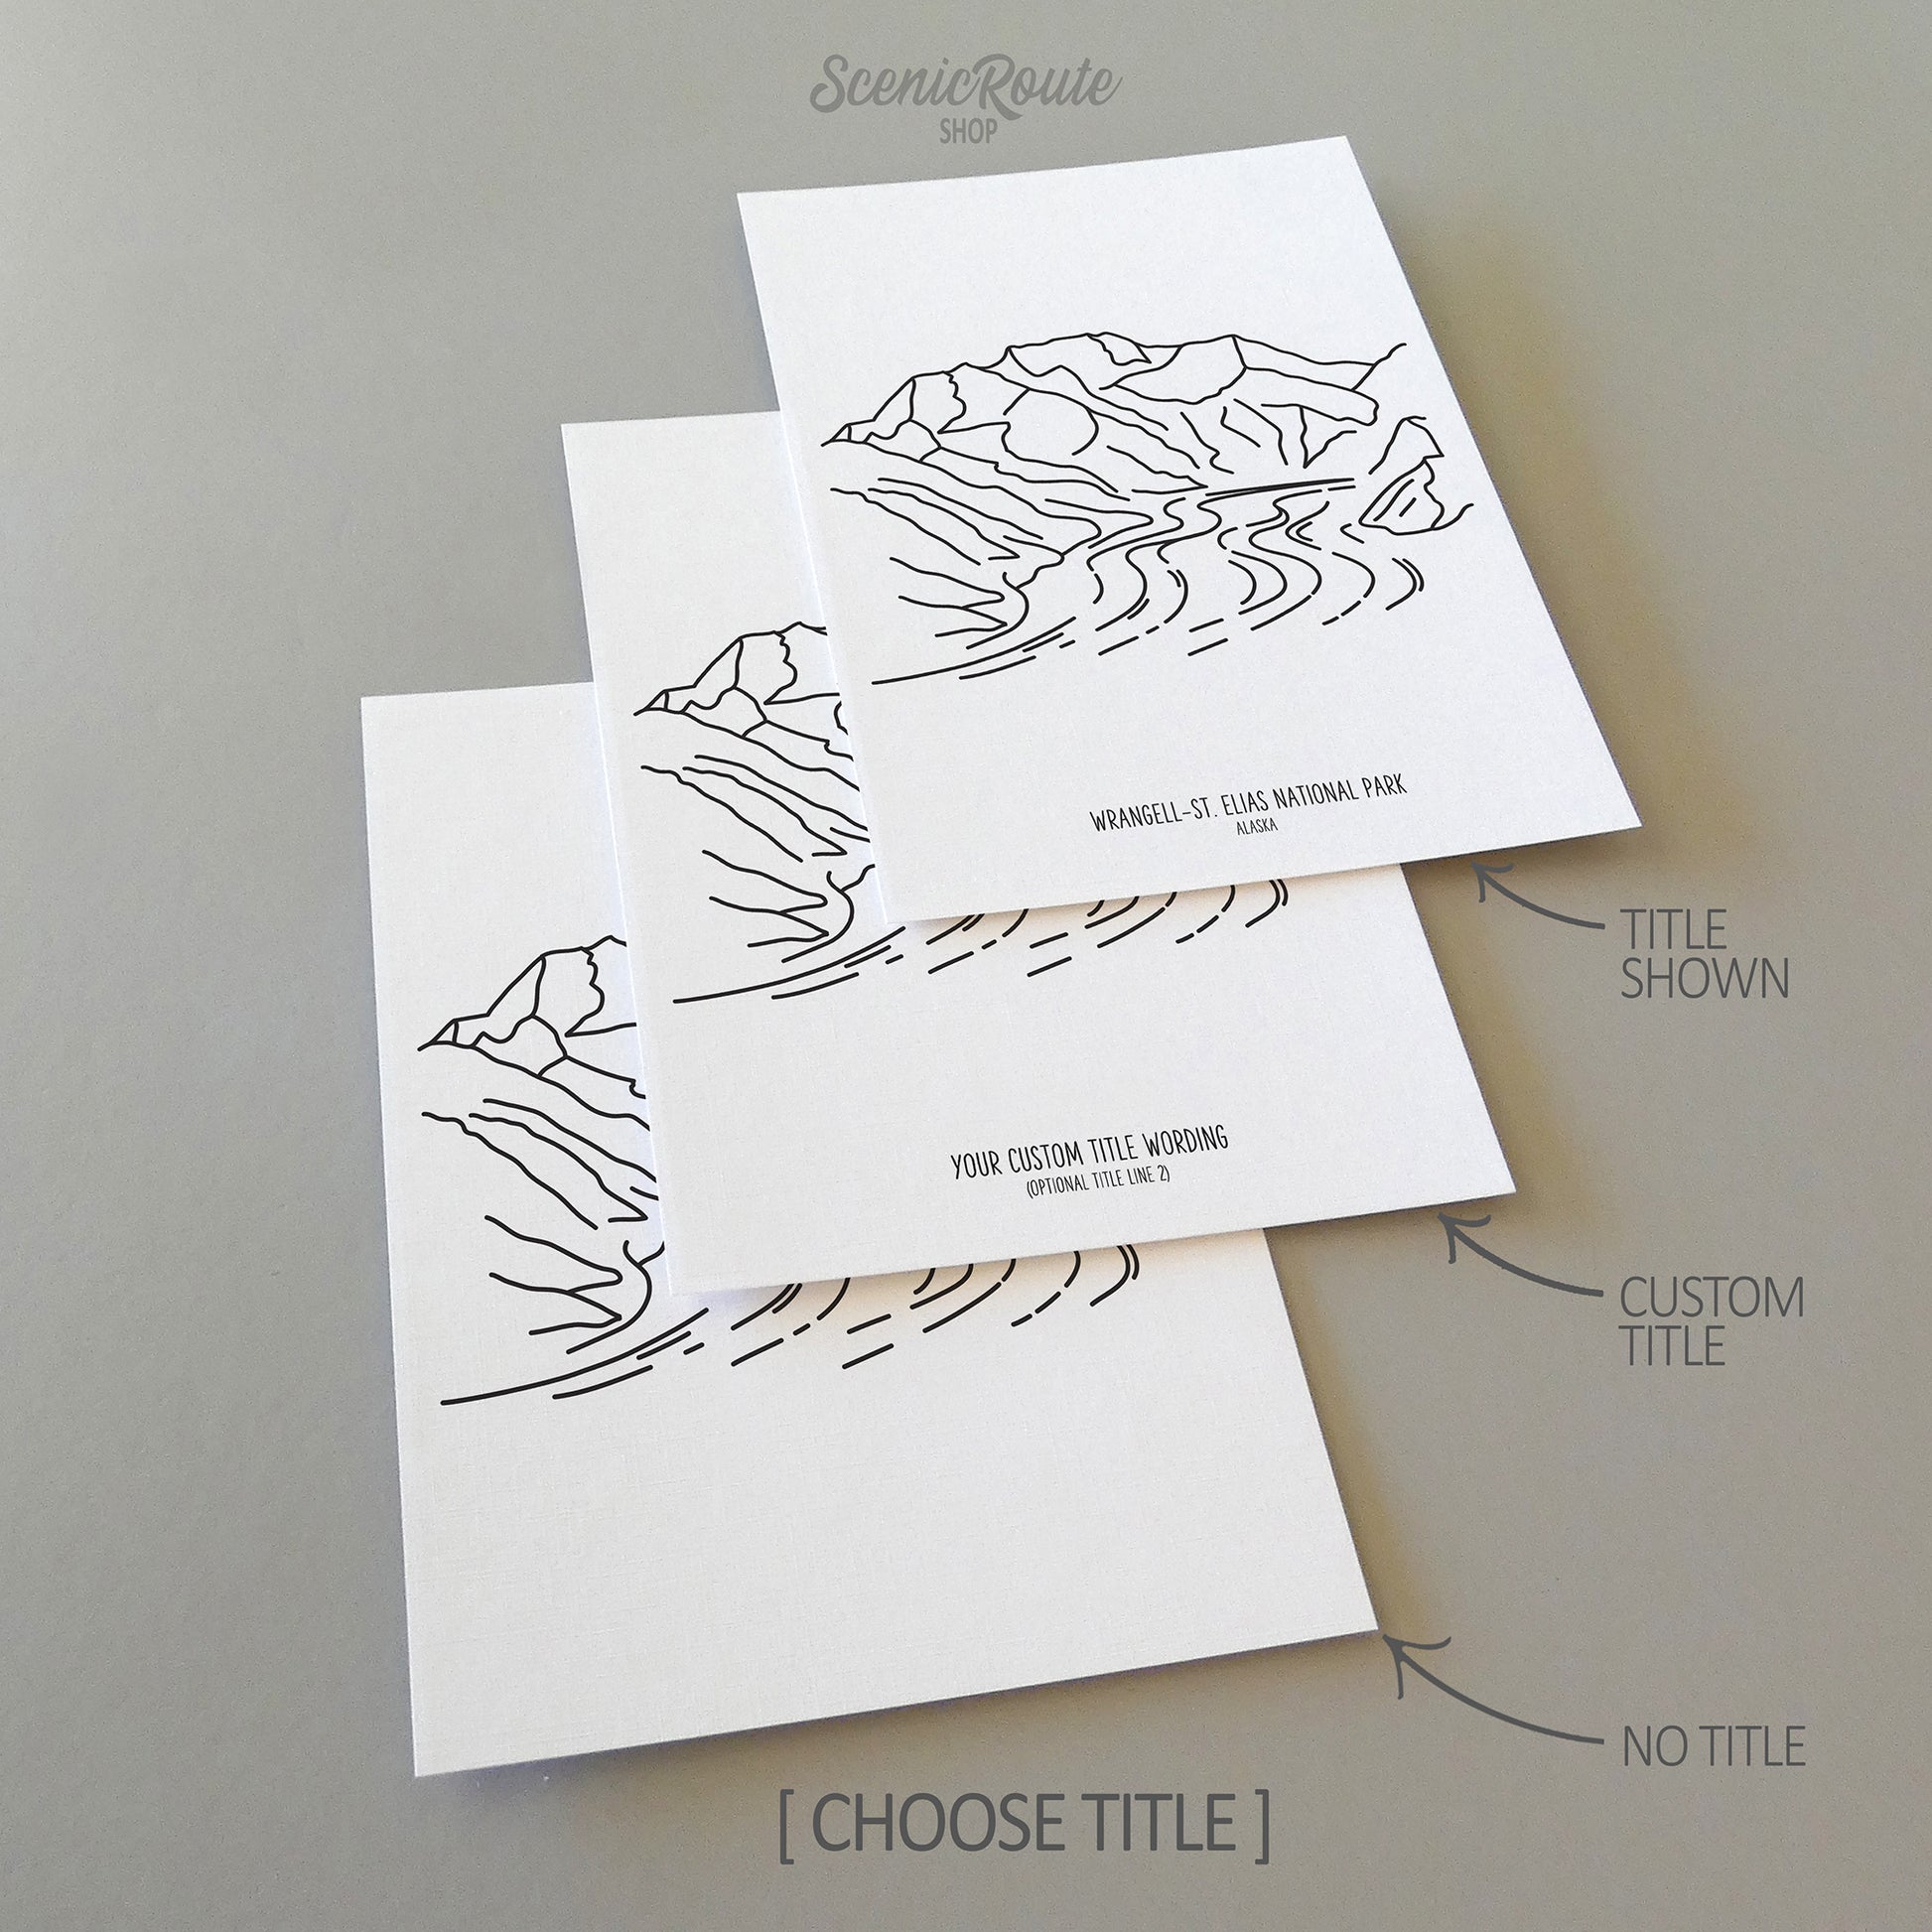 Three line art drawings of Wrangell Saint Elias National Park on white linen paper with a gray background. The pieces are shown with title options that can be chosen and personalized.